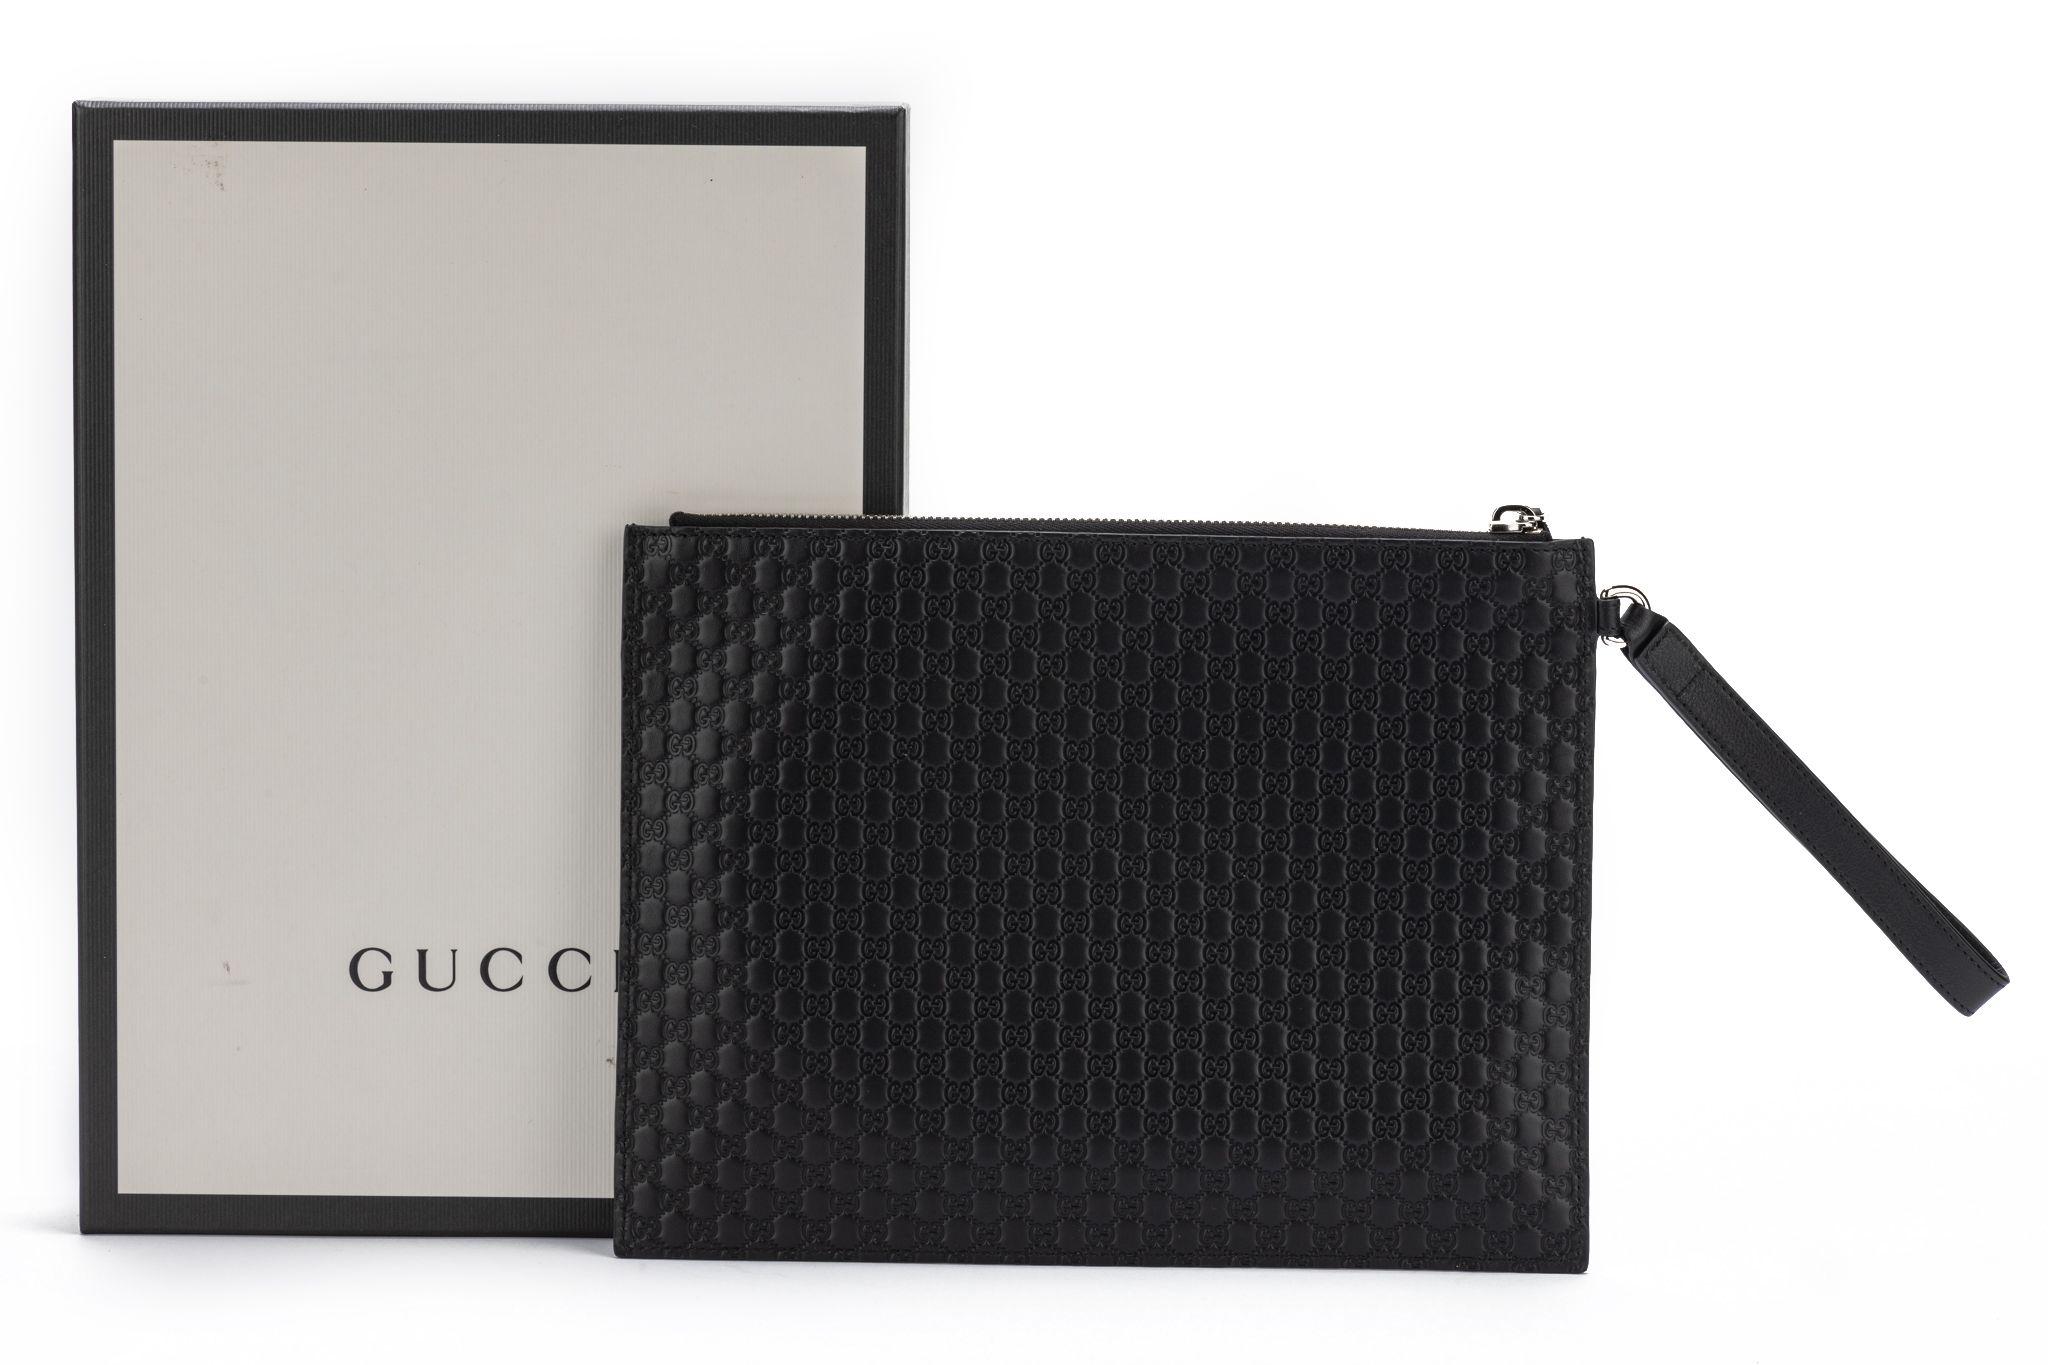 Gucci GG Logo Black Clutch made of leather. It's brand new and comes with booklets and original dustcover and box.